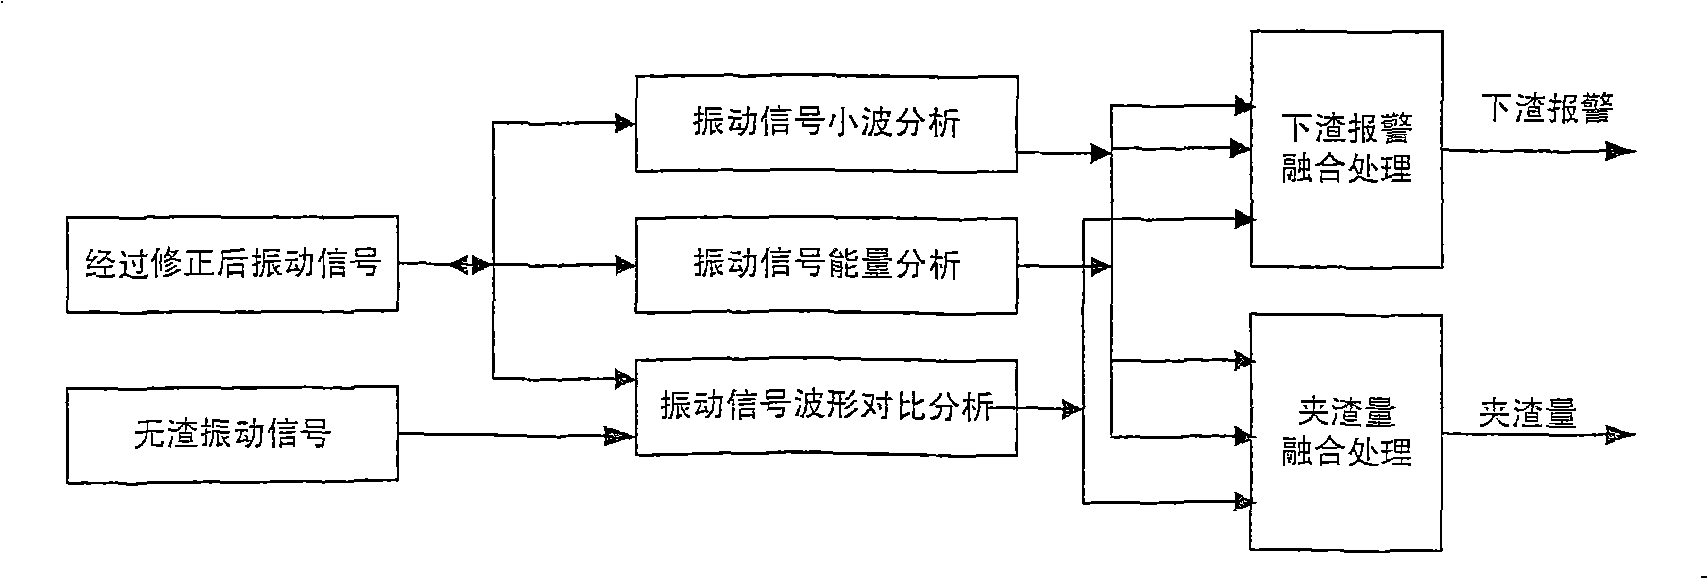 Ladle roughing slag detection, control method and system